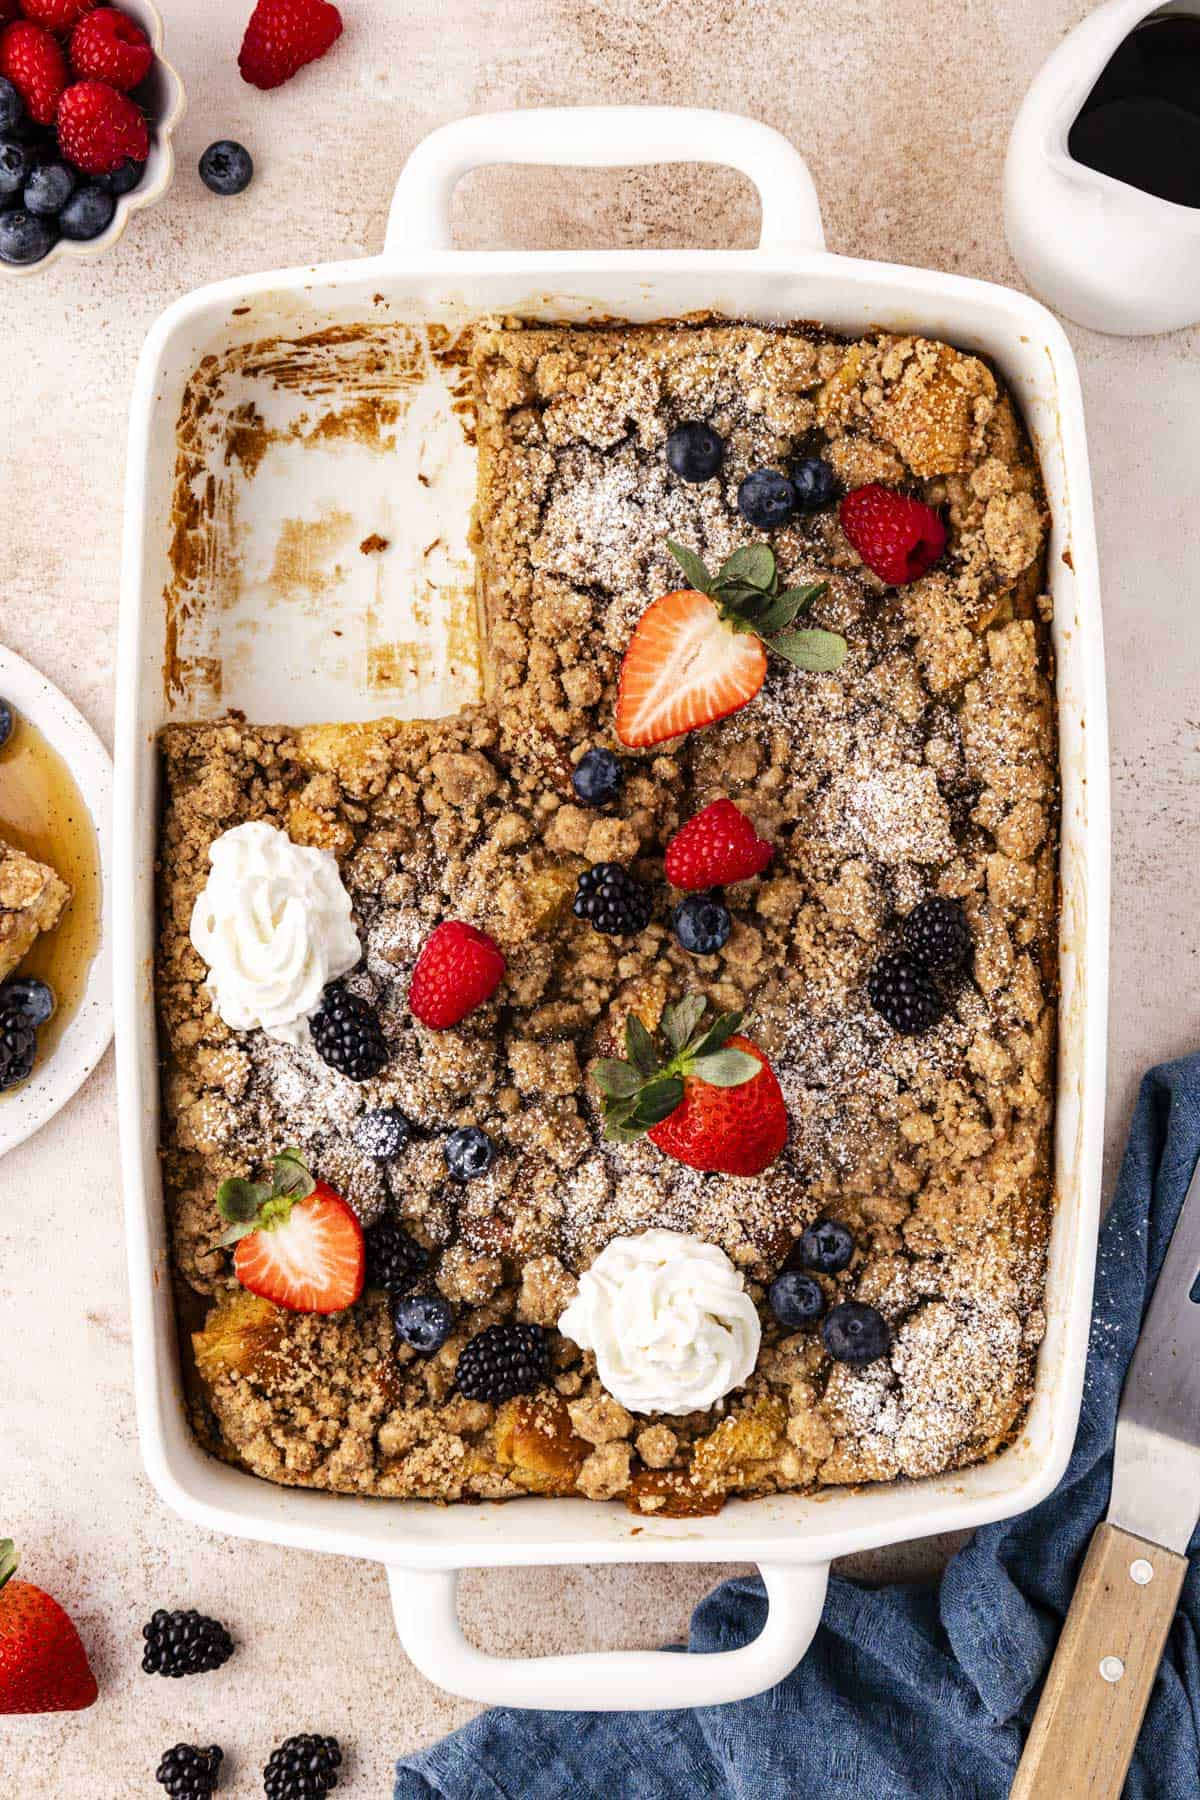 over head view of a white baking dish full of french toast casserole with one slice missing, topped with fresh berries, dollops of whipped cream and a light dusting of powdered sugar, surrounded by a bowl of berries, a dish of syrup, a plate with a slice and syrup on it, a blue kitchen towel and a spatula